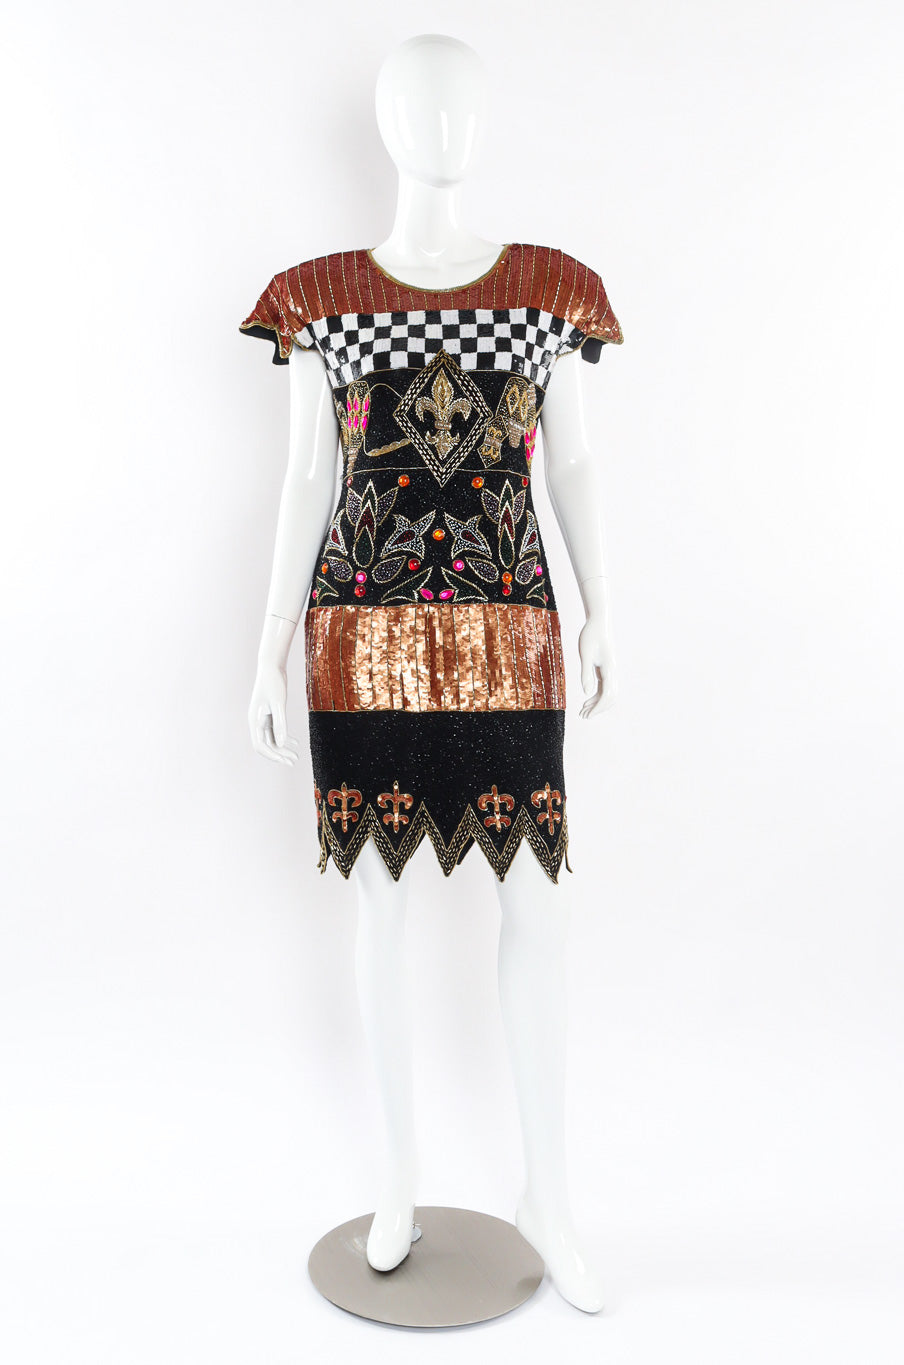 Multi Embellished Cocktail Dress by Fashion Creation front on mannequin @recessla